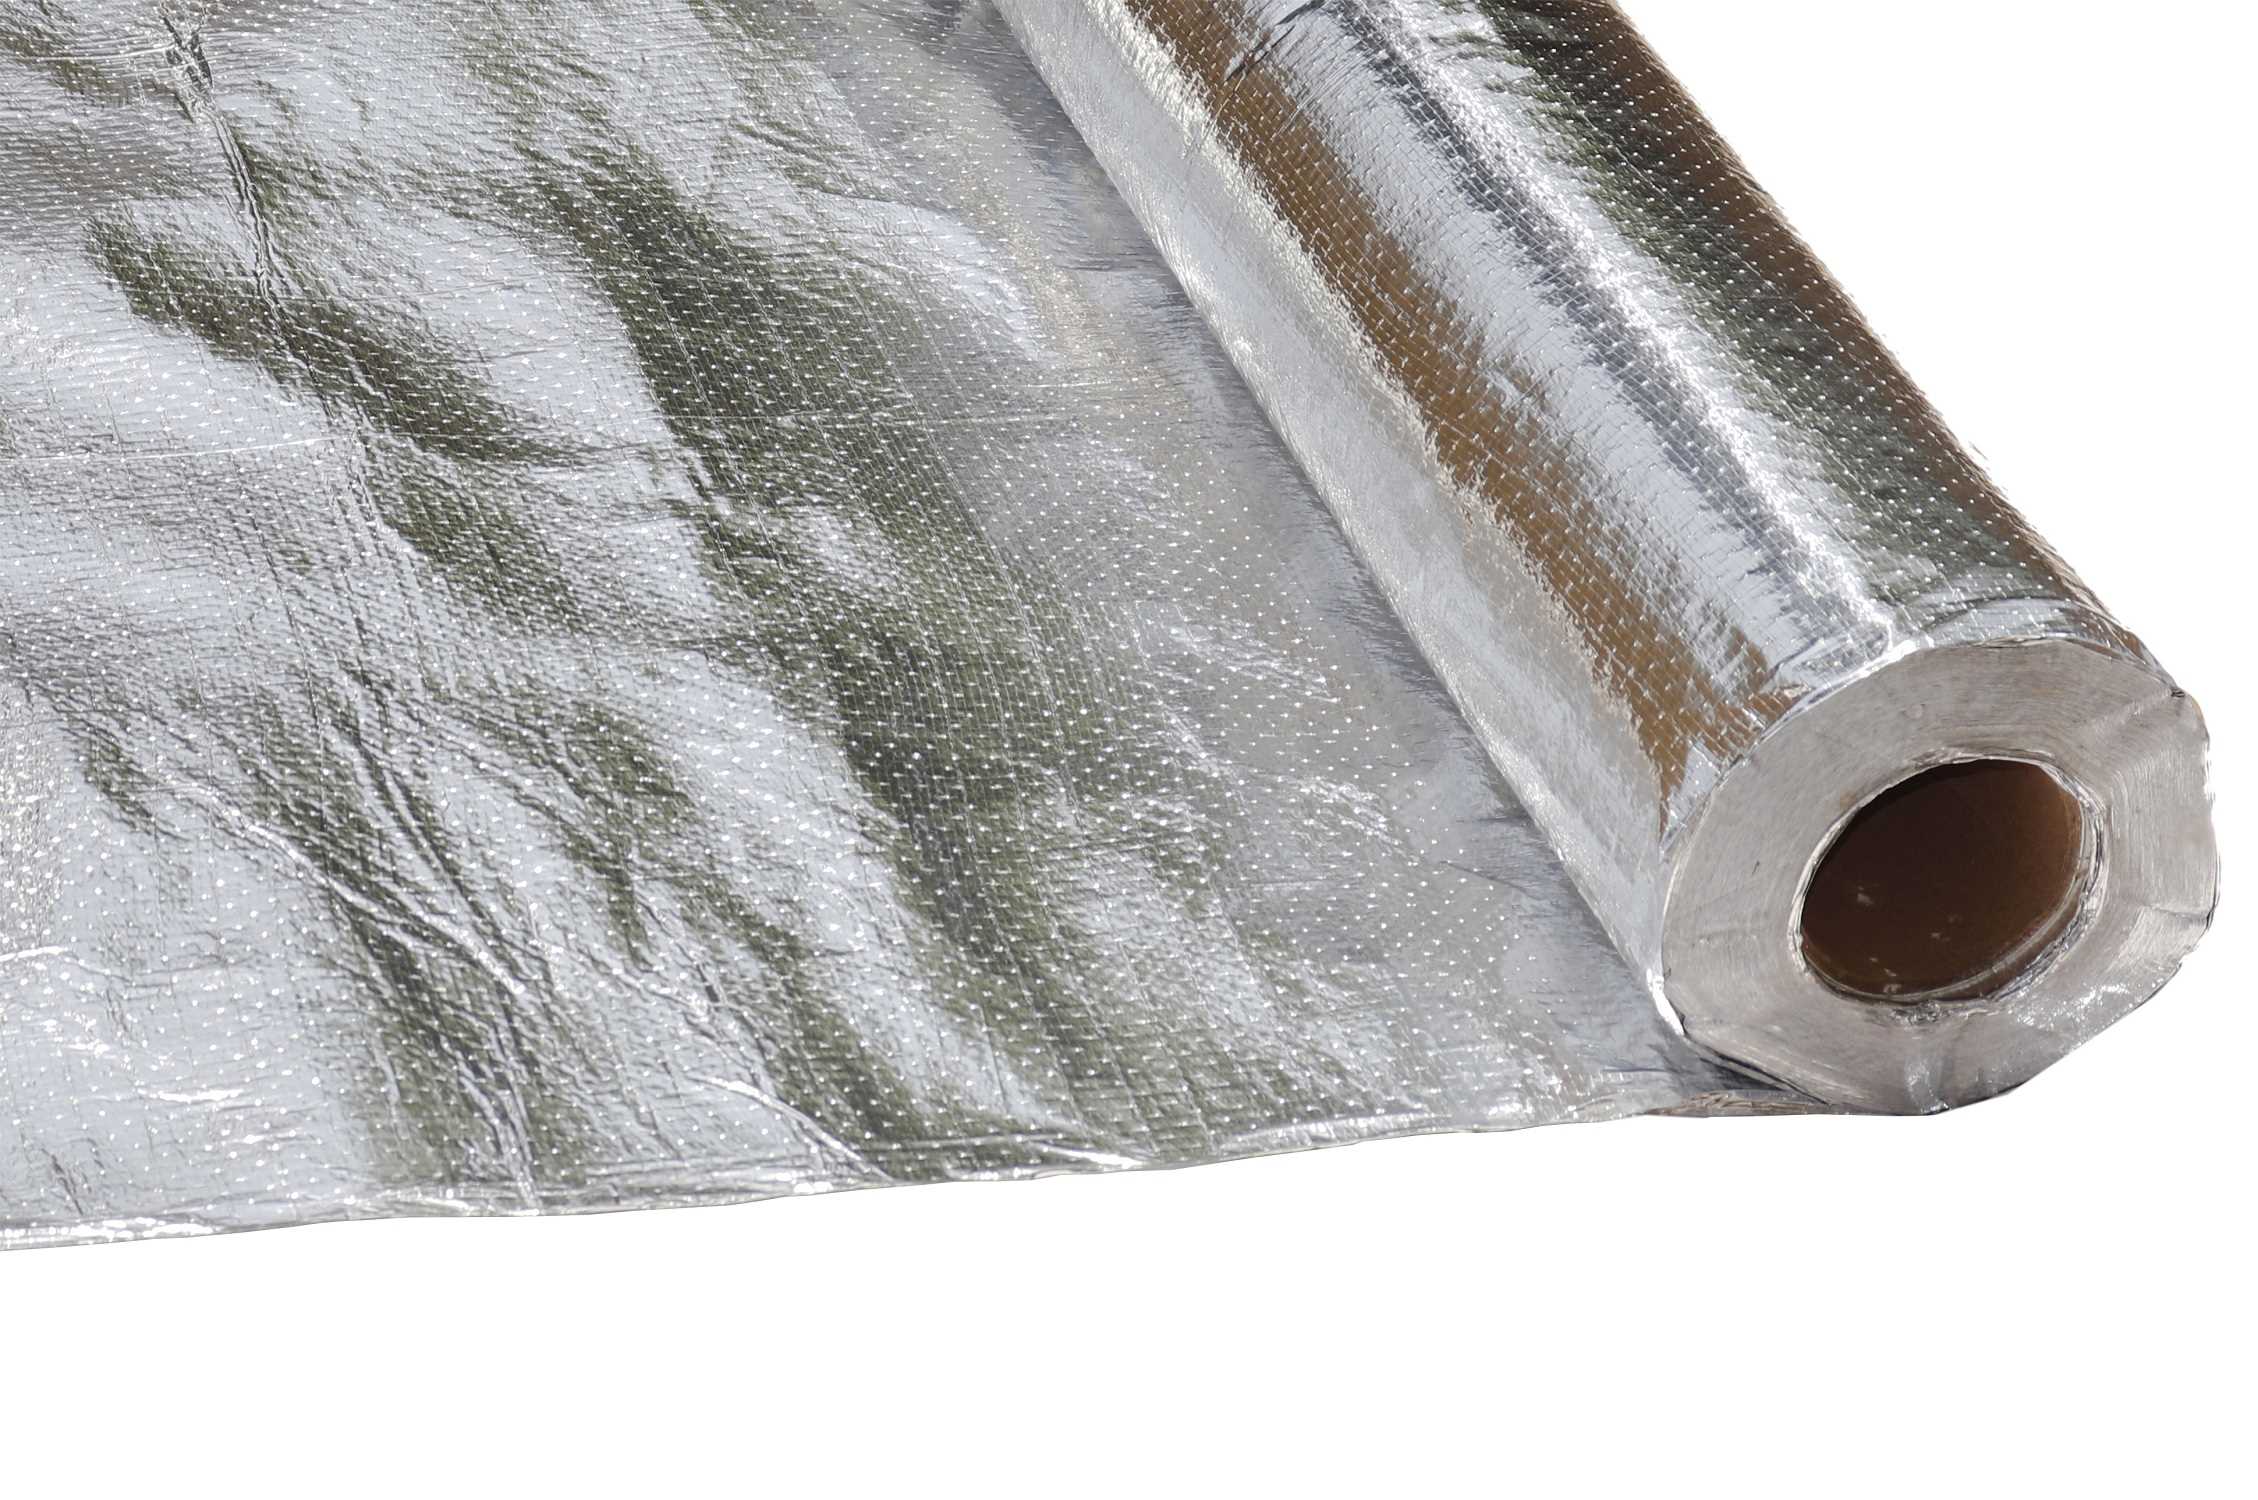 Radiant Barrier Insulation Awa 500 perforated